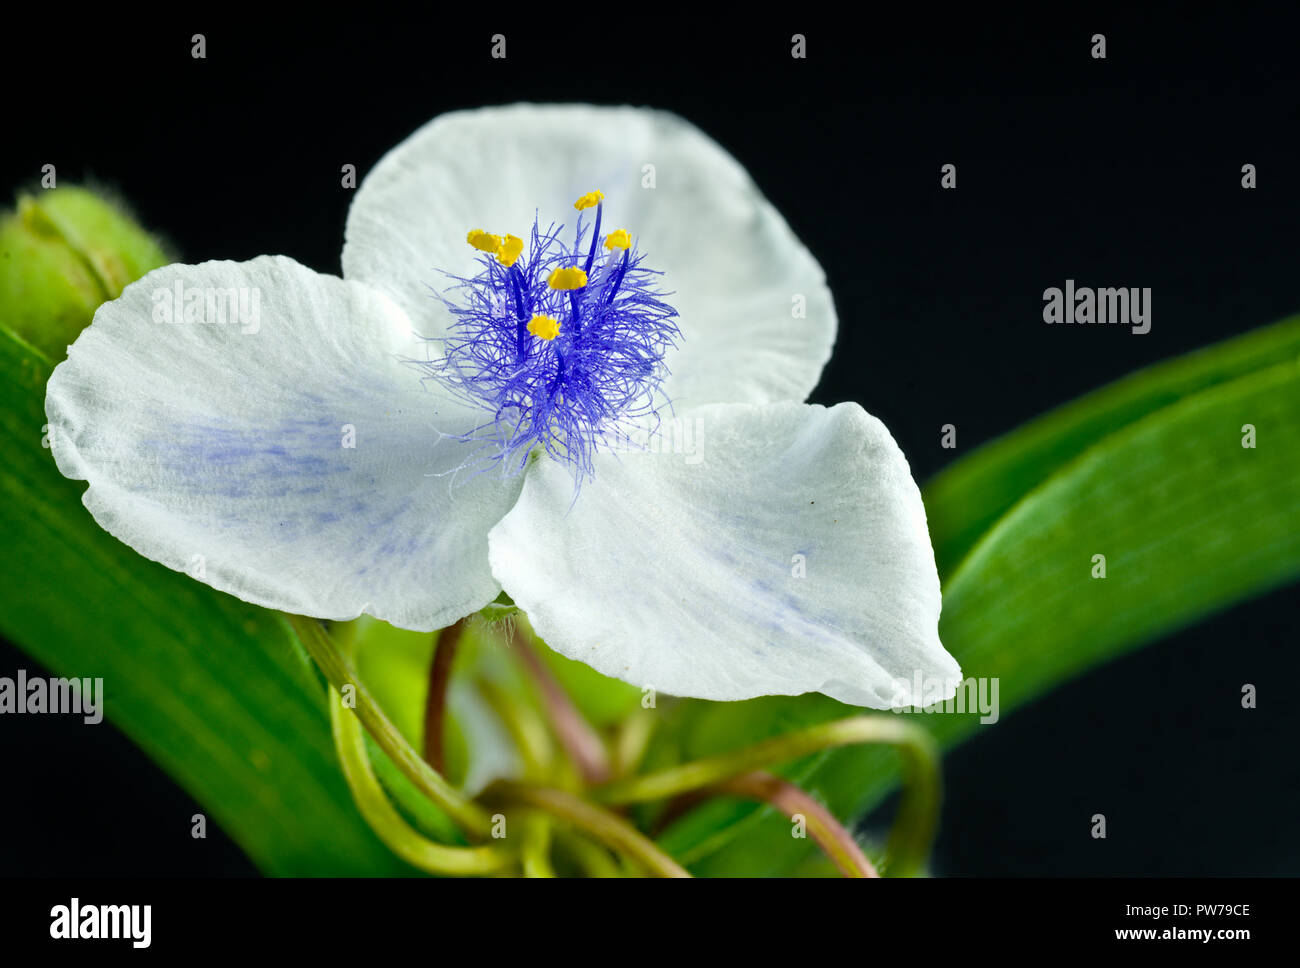 Blossom of white spiderwort (Tradescantia sp.), showing the stamens' brilliant blue filaments and and bright yellow anthers. Stock Photo